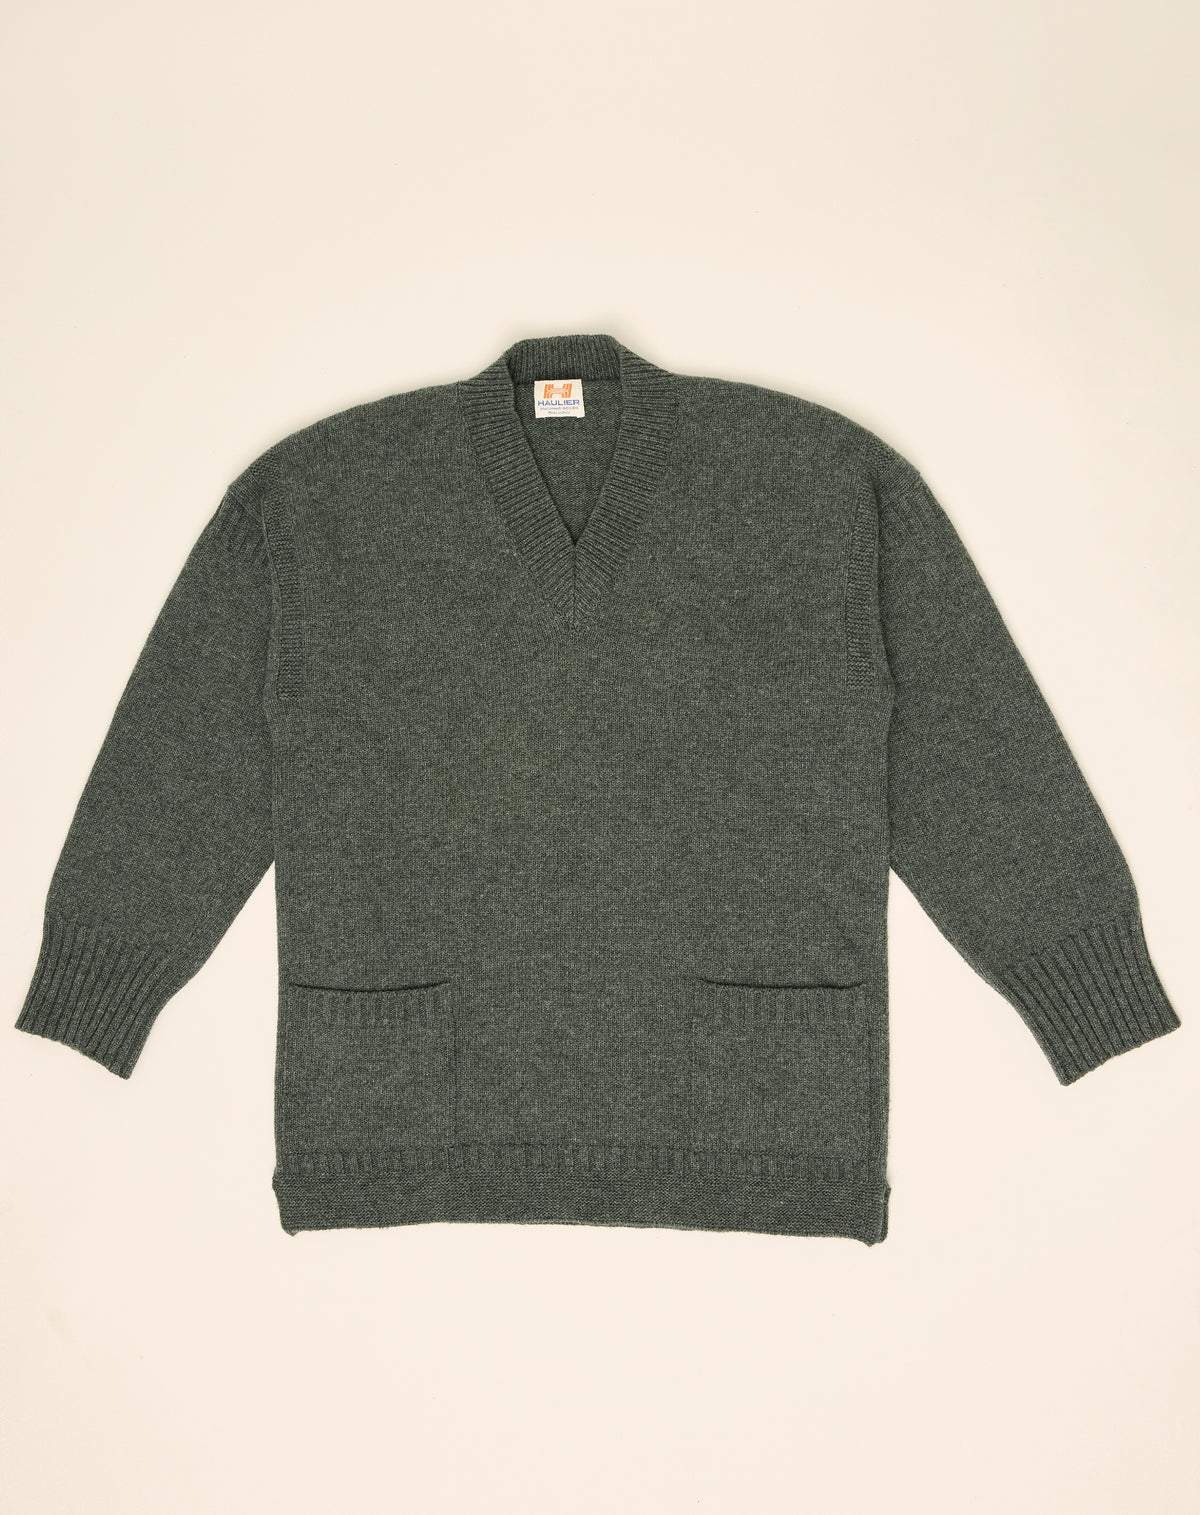 Guernsey Knit - Charcoal